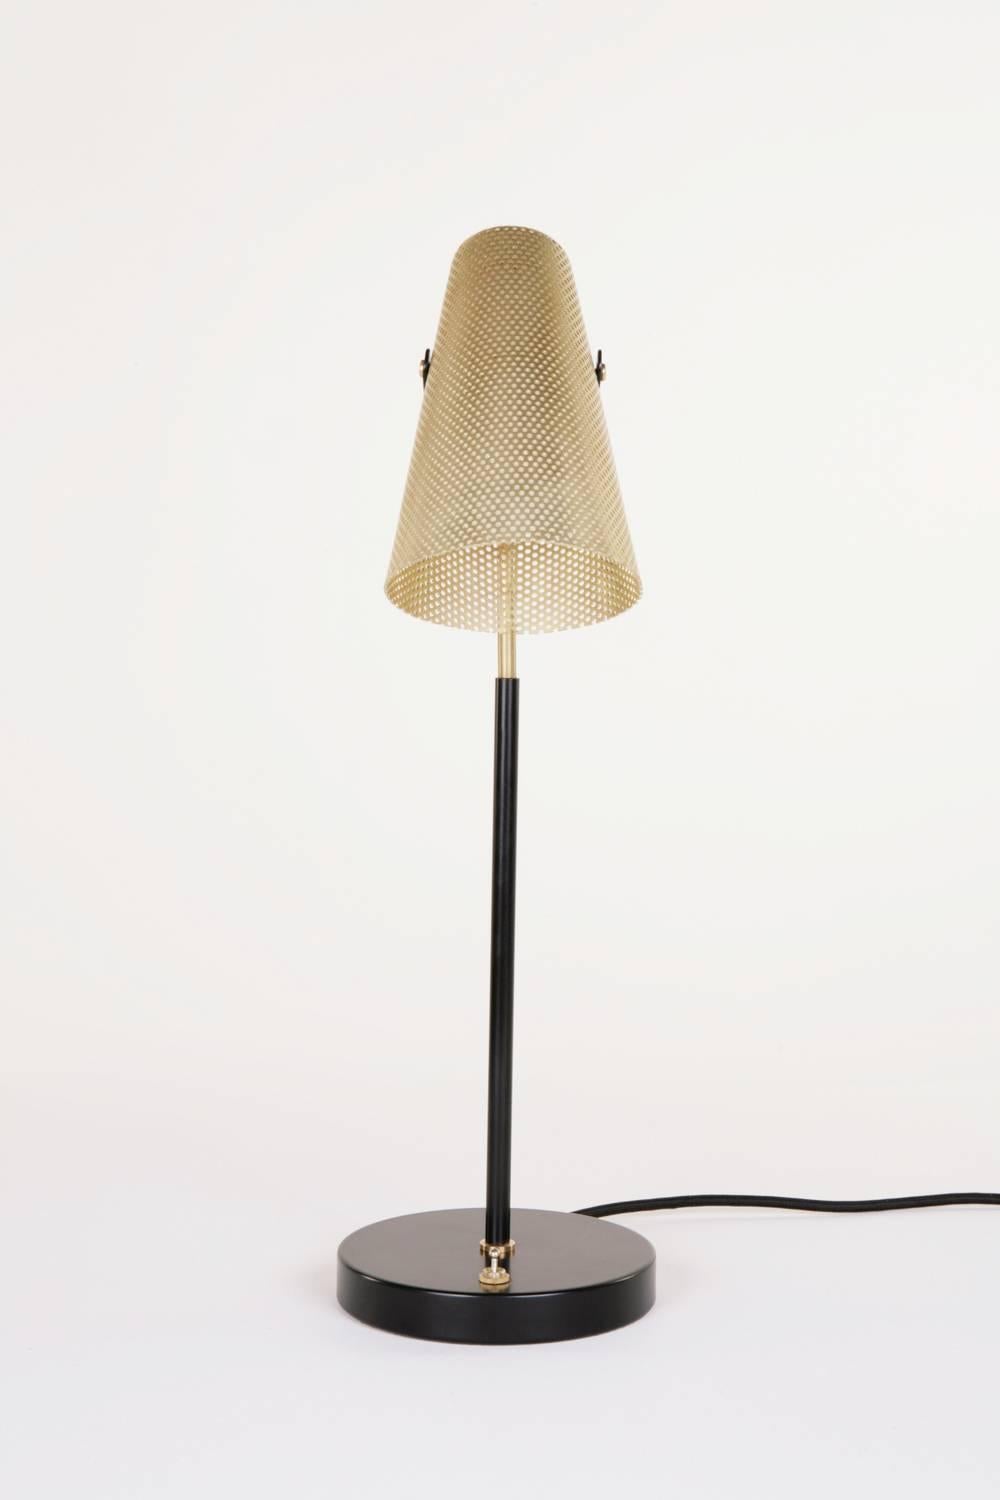 Inspired by the simplicity of equestrian spurs, the Eperon lamp holds a perforated brass shade on a brass stem, with a black powder coated base. This unique desk lamp offers a Directional light, while also emitting a soft glow through the